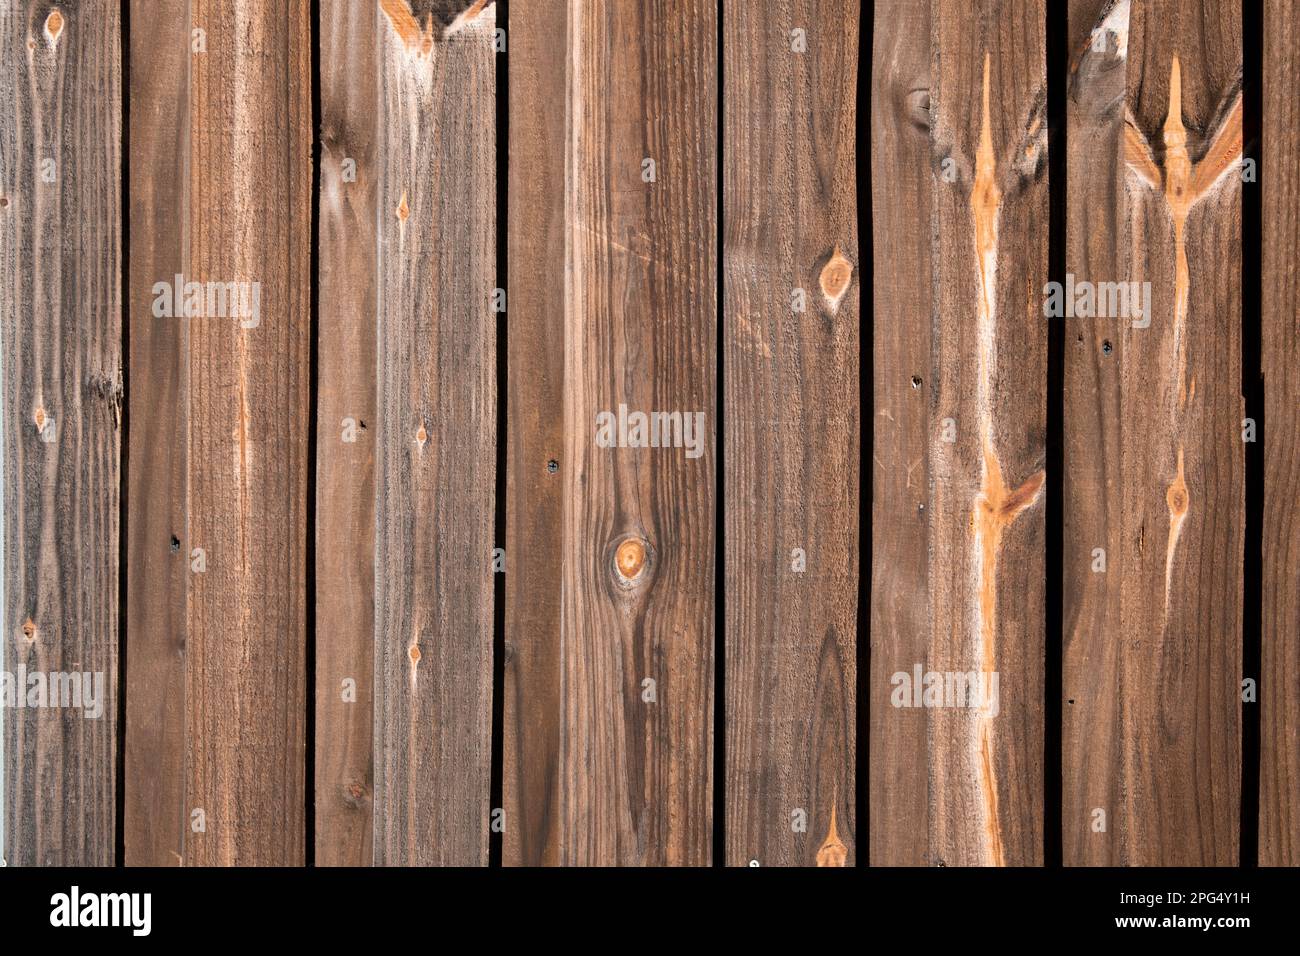 Bright wood panel fence with grain and knots background Stock Photo